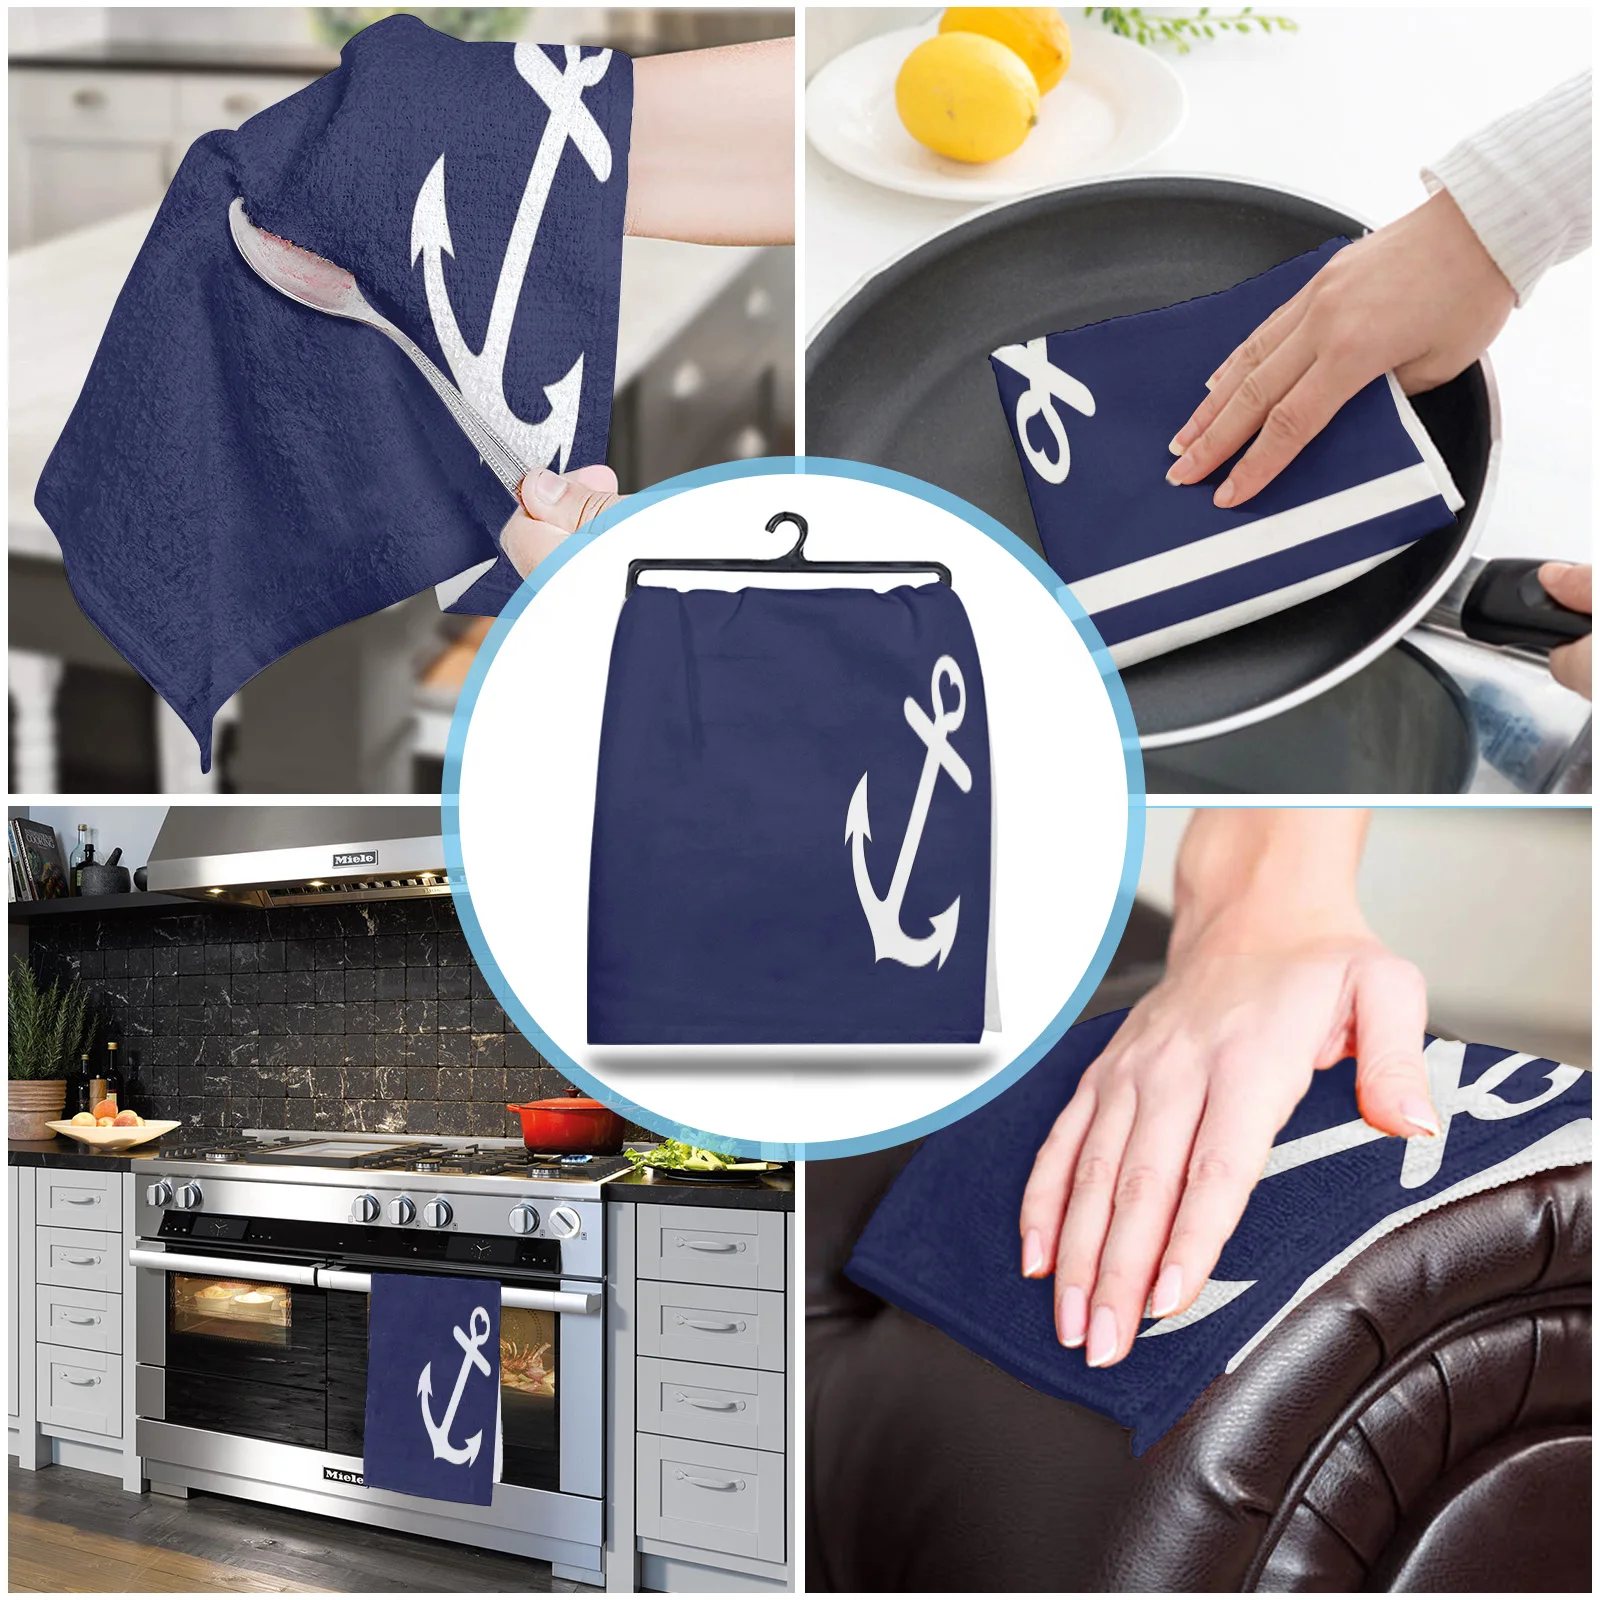 https://ae01.alicdn.com/kf/S16357cce1b8d41bba0a5981cefa39724U/Blue-White-Stripes-Anchor-Microfiber-Kitchen-Hand-Towel-Dish-Cloth-Tableware-Household-Cleaning-Towel-Utensils-for.jpg